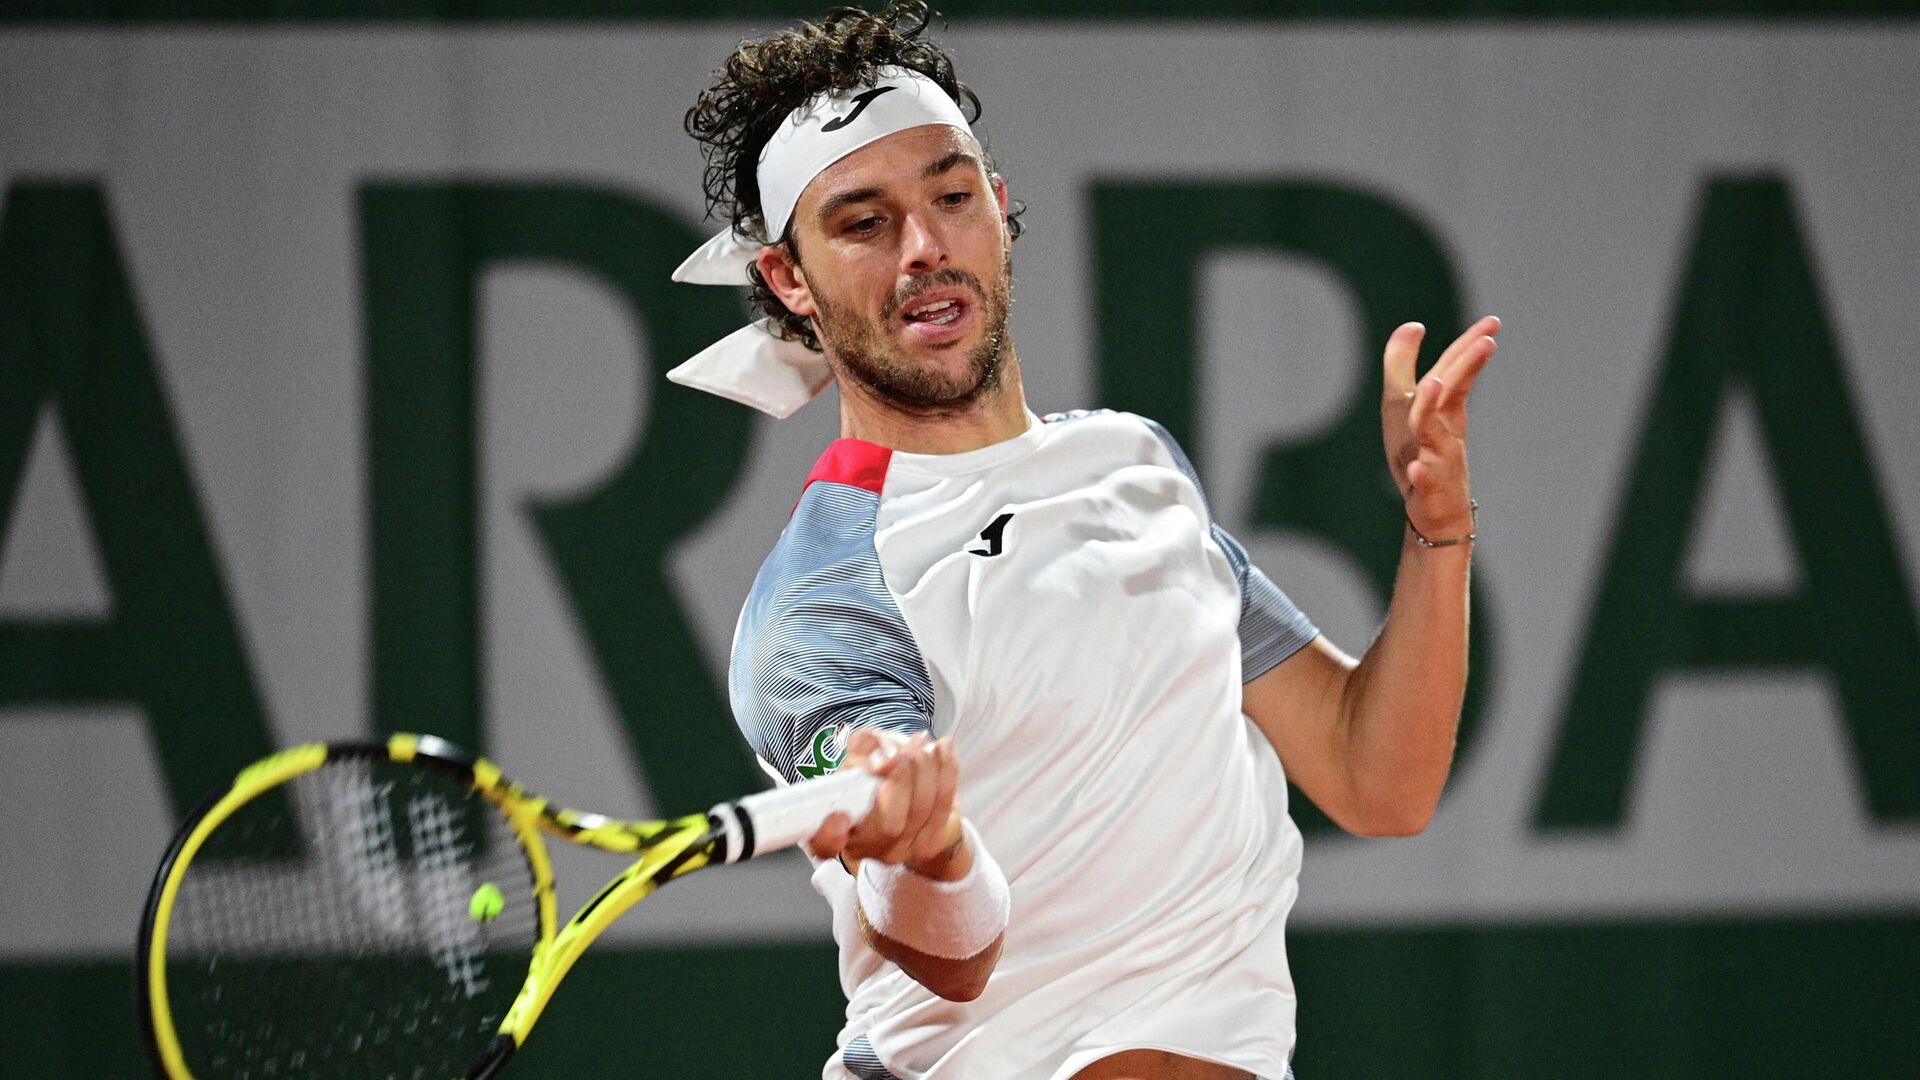 Italy's Marco Cecchinato returns the ball to Germany's Alexander Zverev during their men's singles third round tennis match on Day 6 of The Roland Garros 2020 French Open tennis tournament in Paris on October 2, 2020. (Photo by MARTIN BUREAU / AFP) - РИА Новости, 1920, 28.05.2021